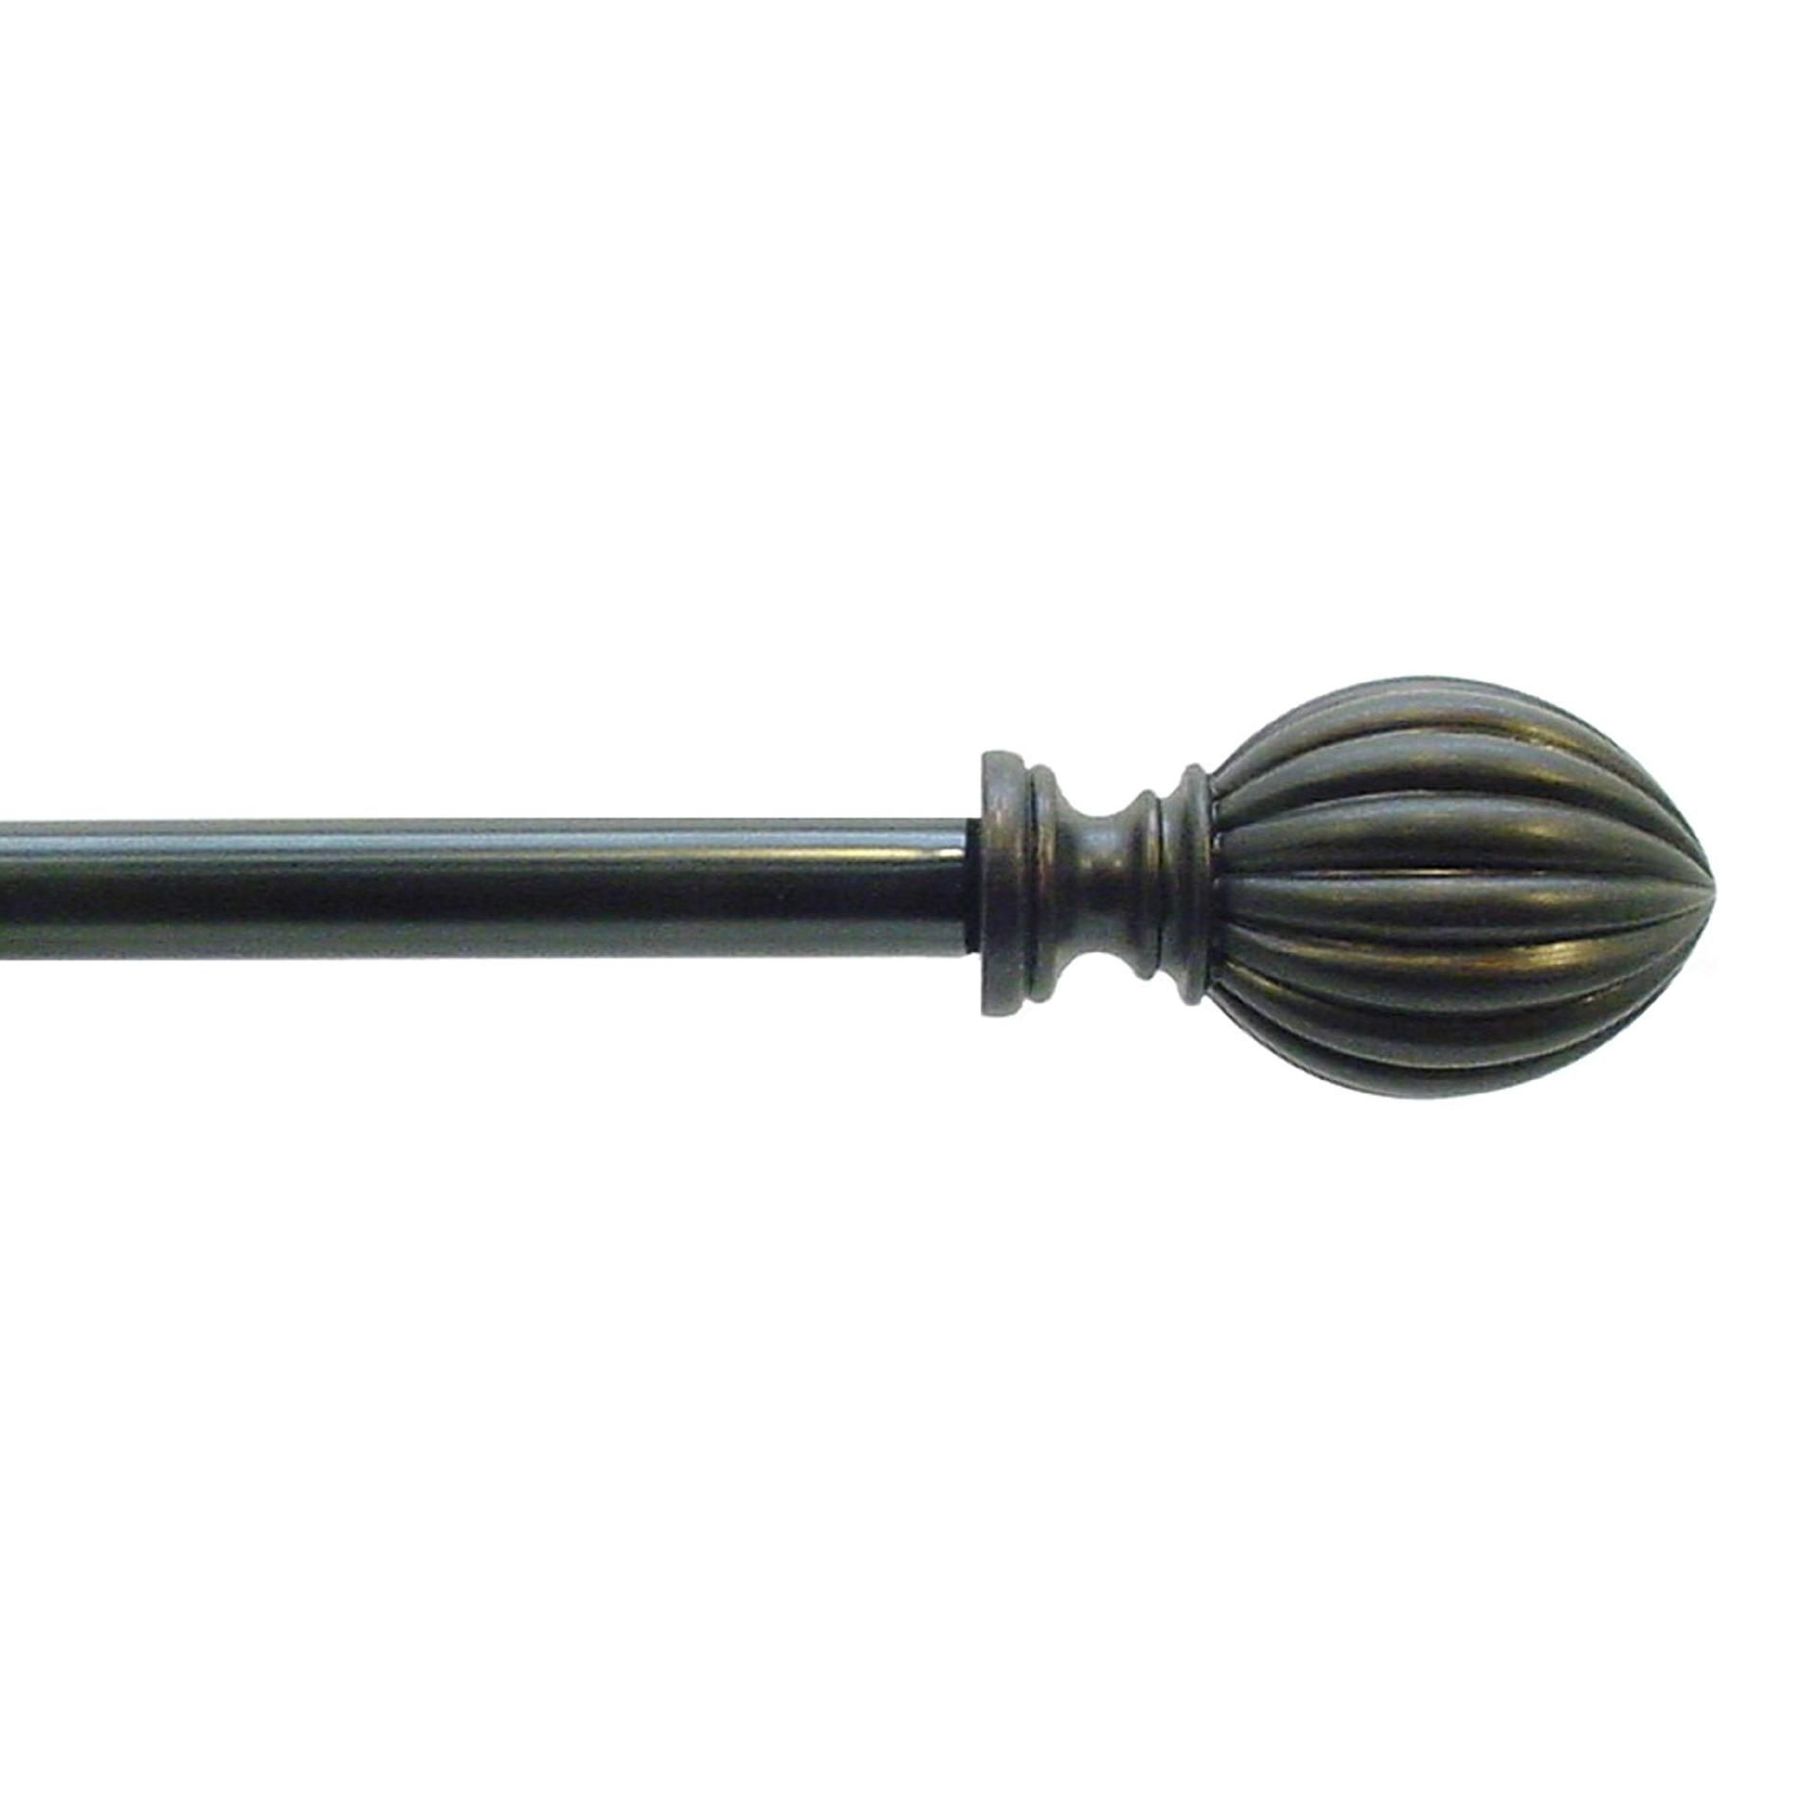 Essential Home Normandy Curtain Rod Set